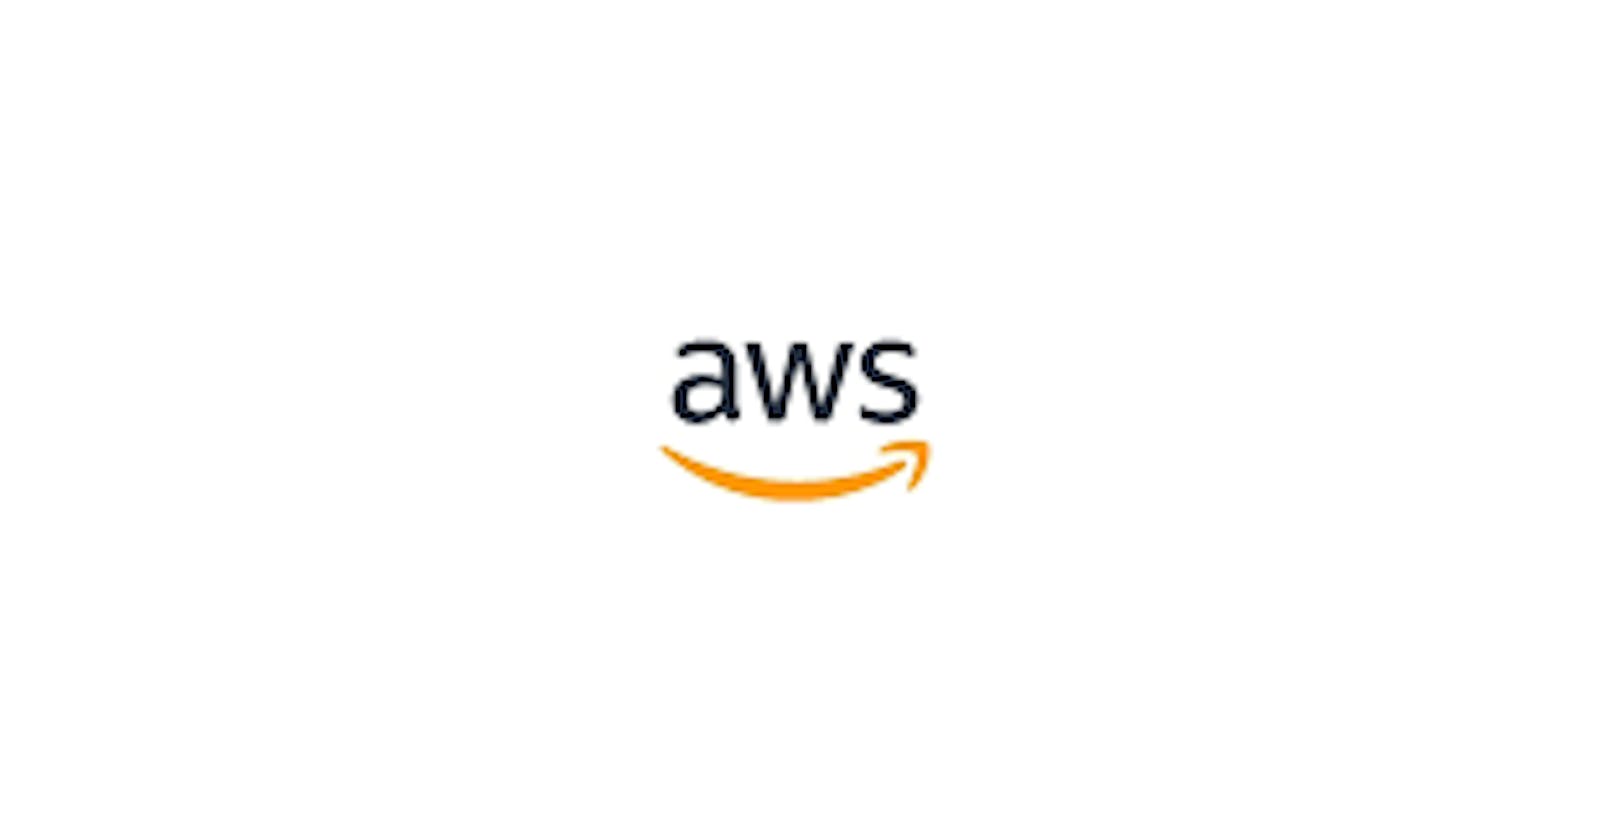 What are the ways AWS is dominating in this Cloud Market?